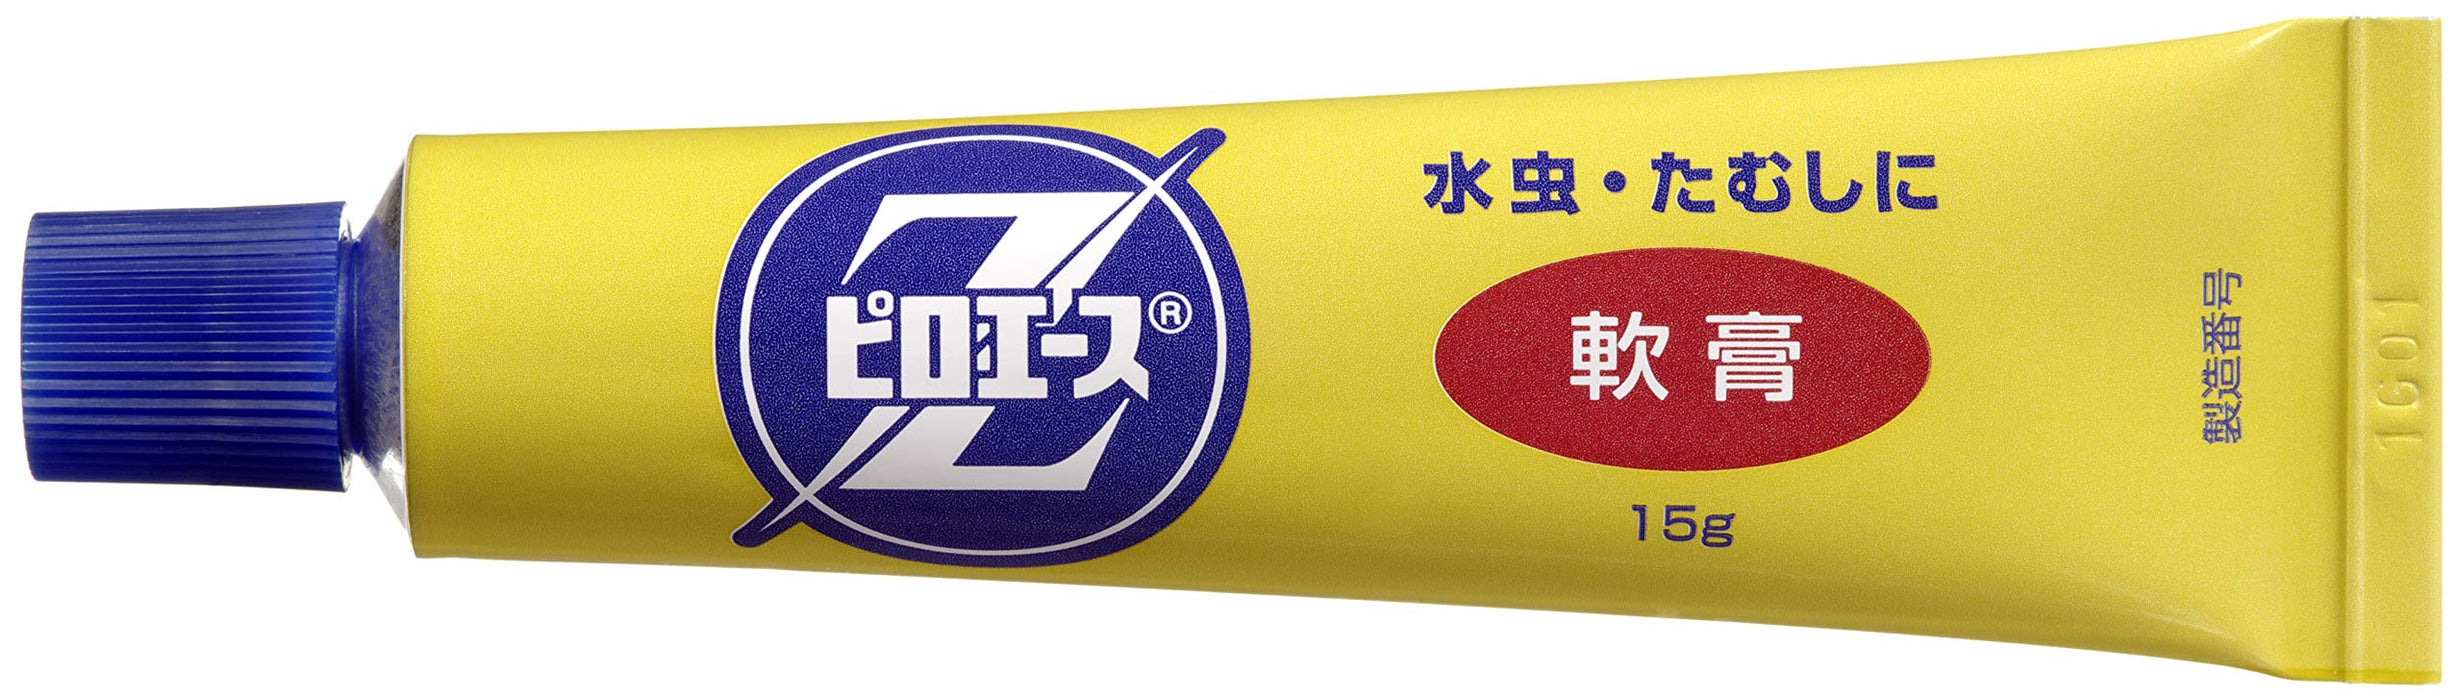 Pillow Ace Piroace Z Ointment 15G Japan - Self-Medication Tax System